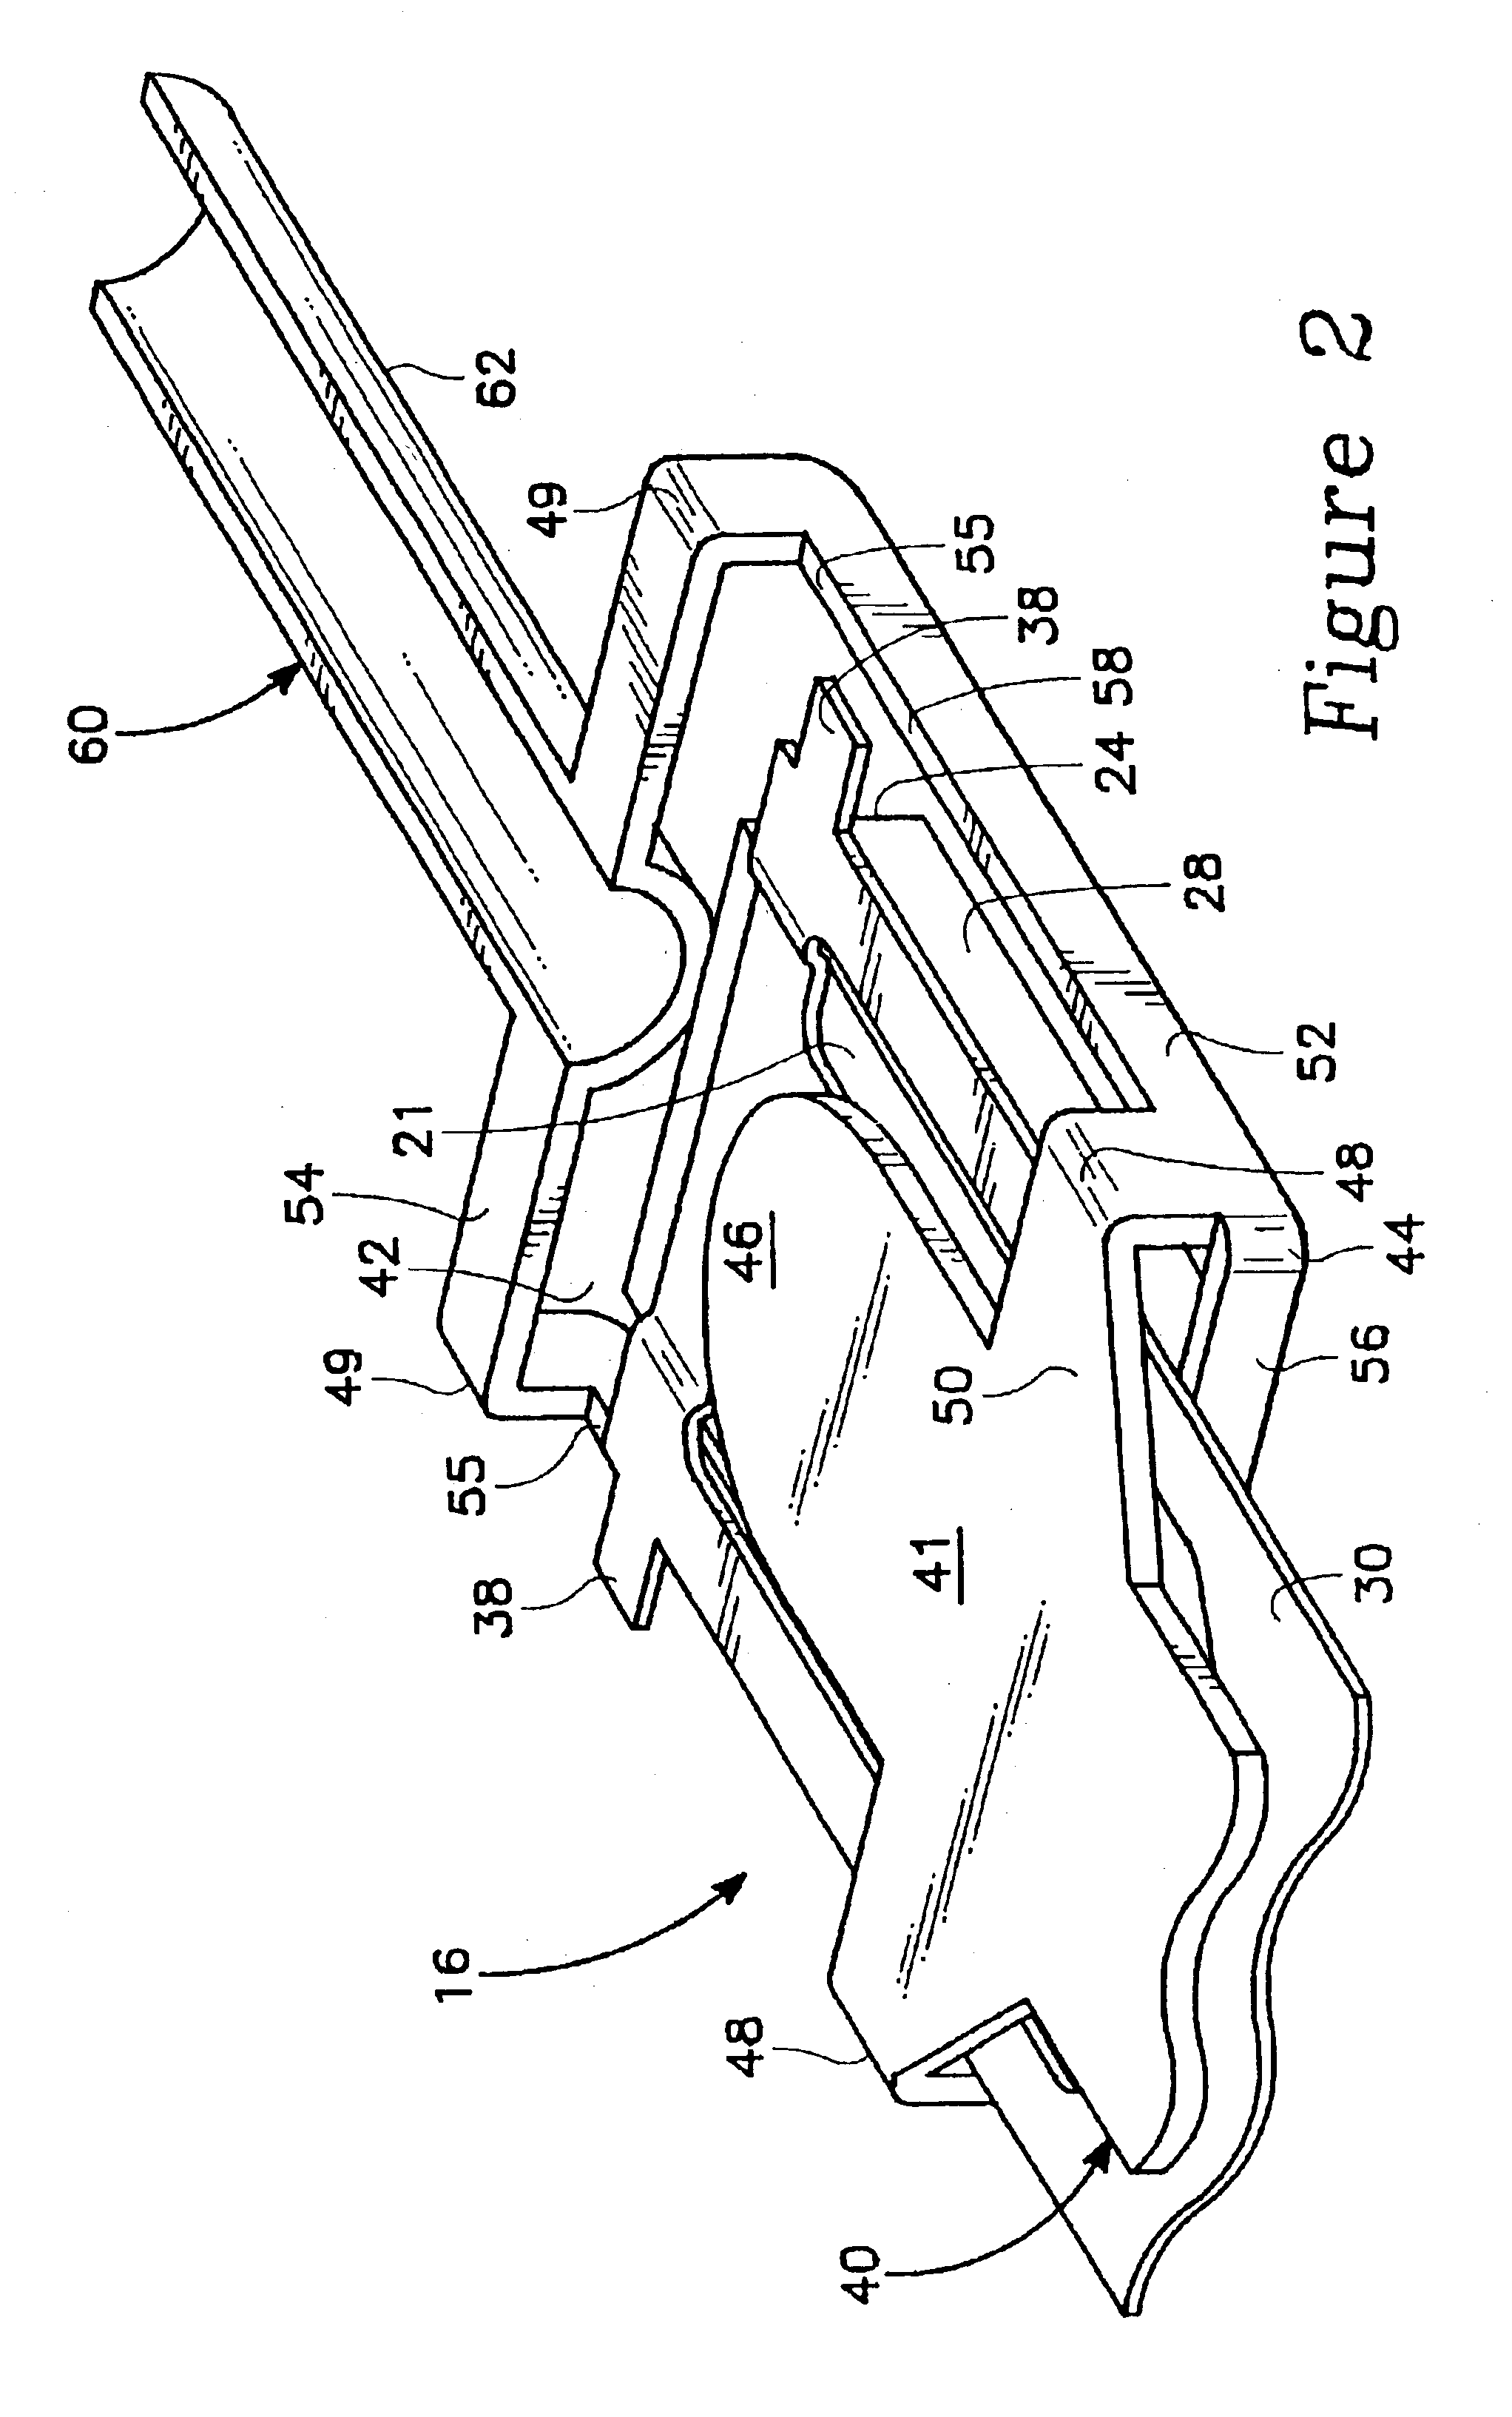 Method of manufacturing a head gimbal assembly with substantially orthogonal tab, side beam and base